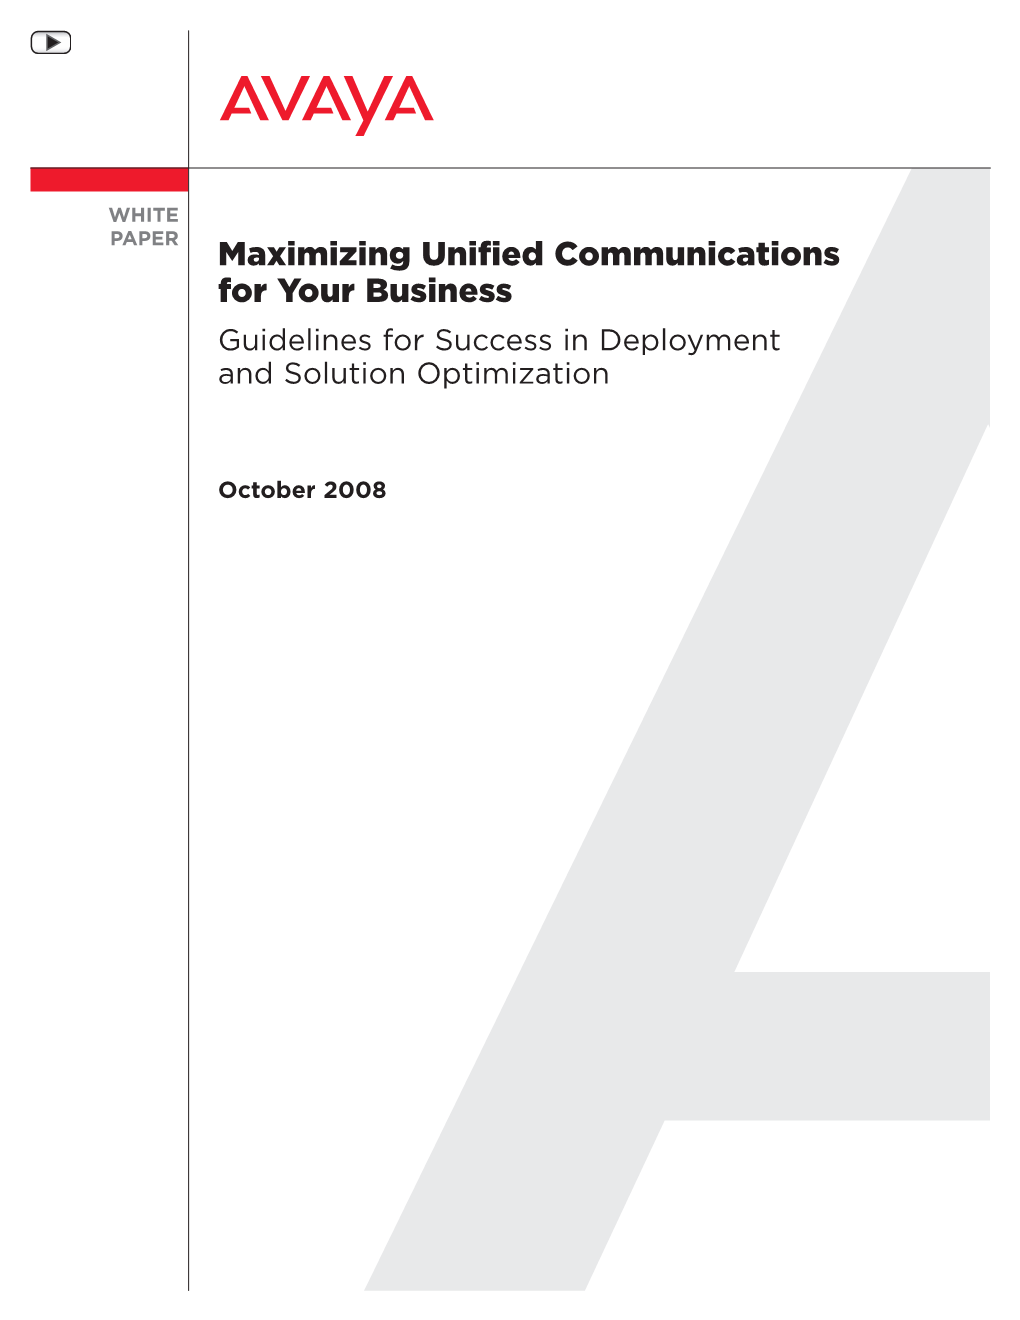 Maximizing Unified Communications for Your Business Guidelines for Success in Deployment and Solution Optimization